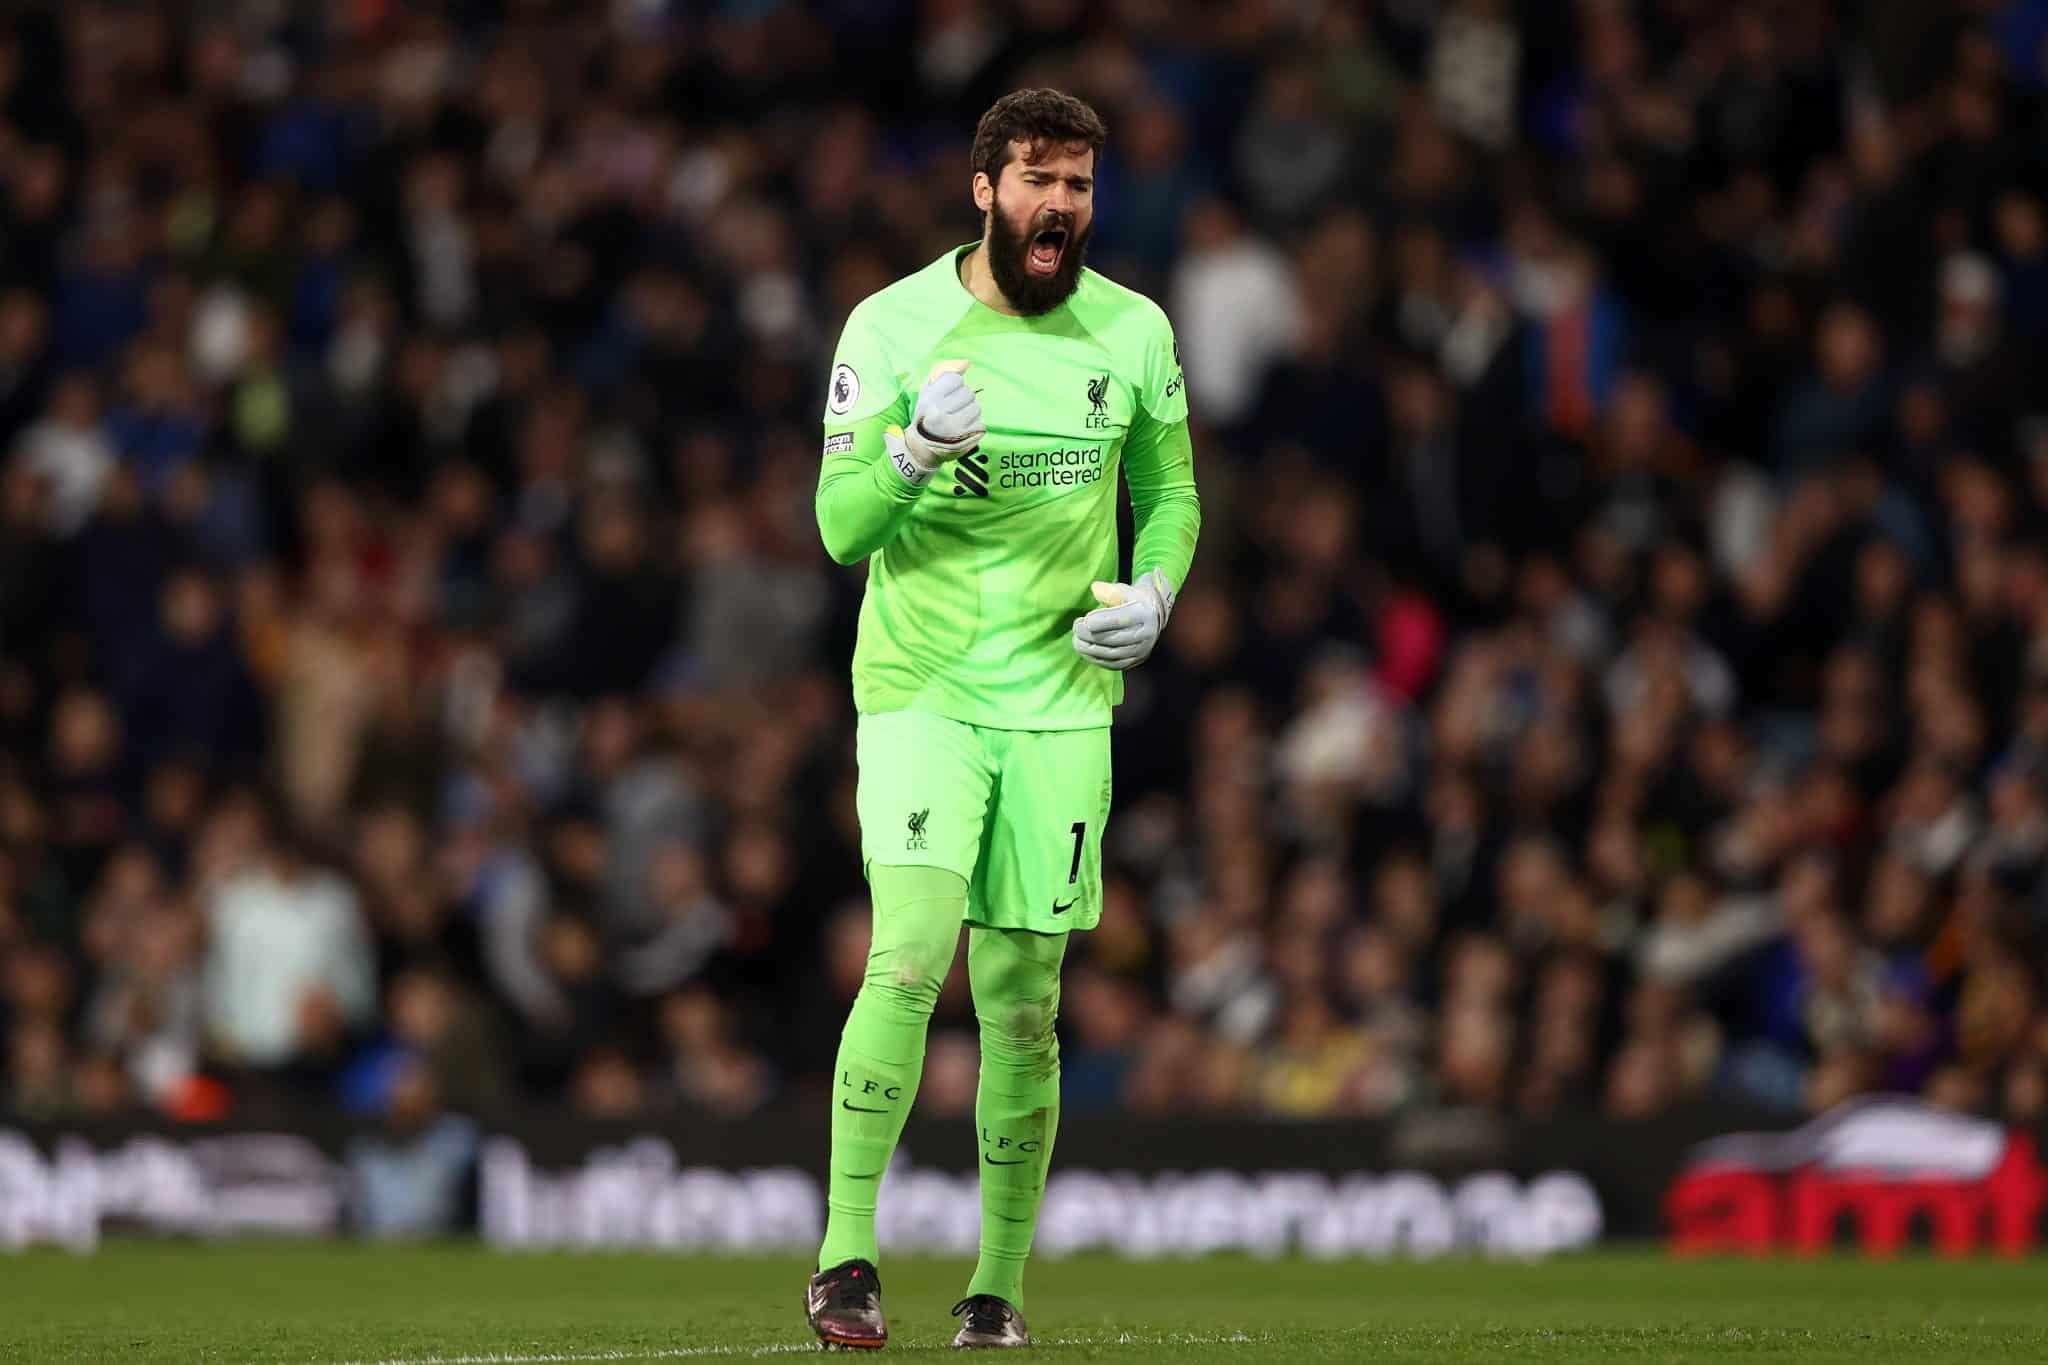 Is Alisson Becker the greatest goalkeeper in Liverpool’s Premier League history?